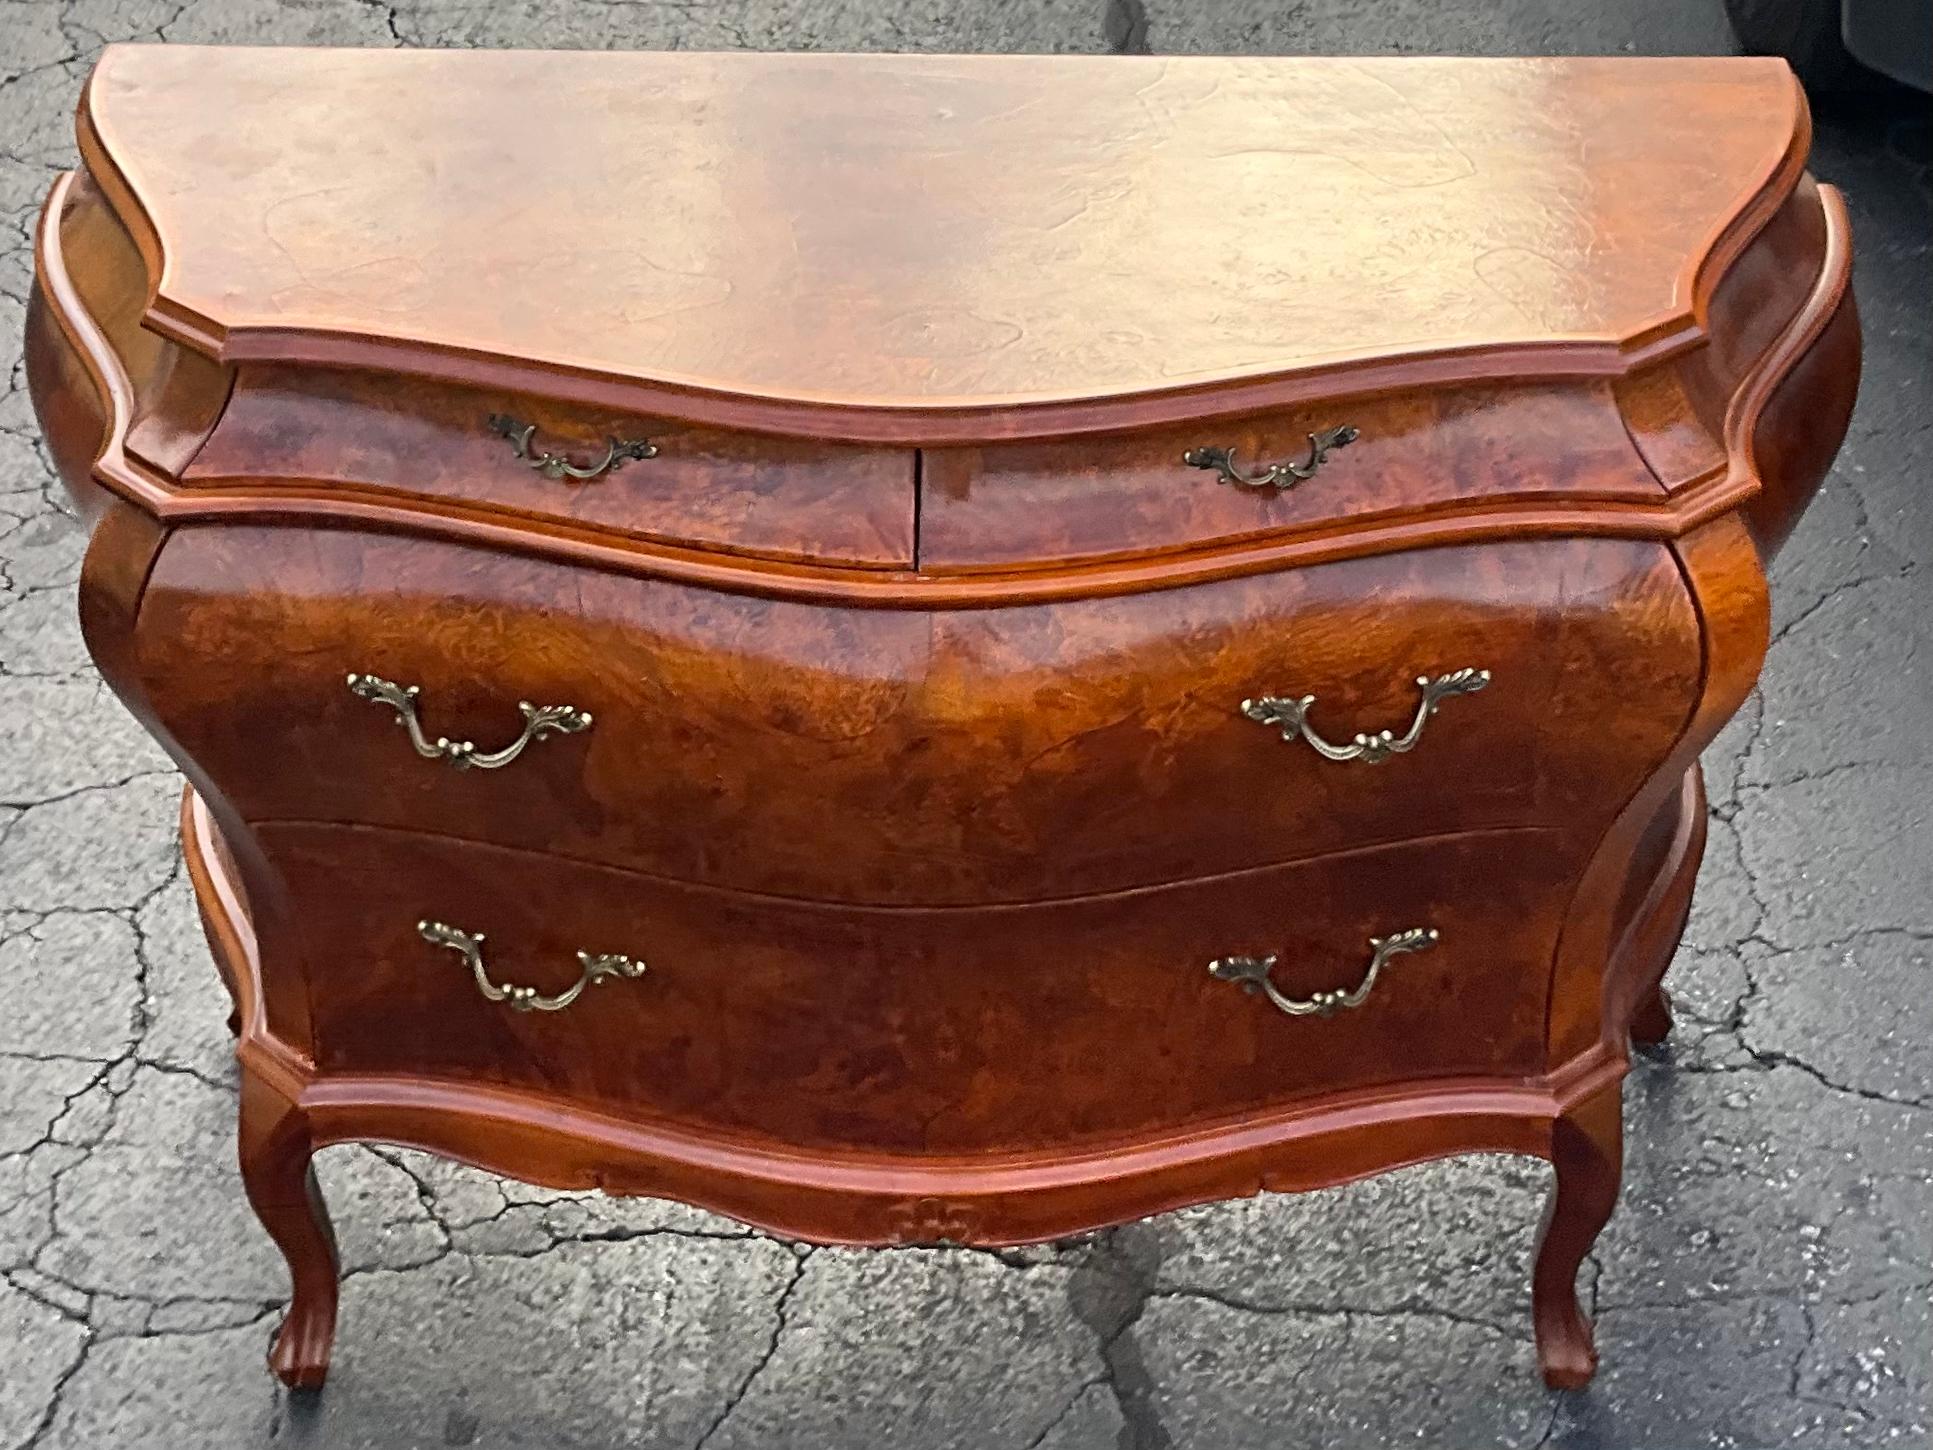 Laiton 1970 French Style Italian Burlwood And Brass Commodes / Chest Of Drawers - Pair en vente